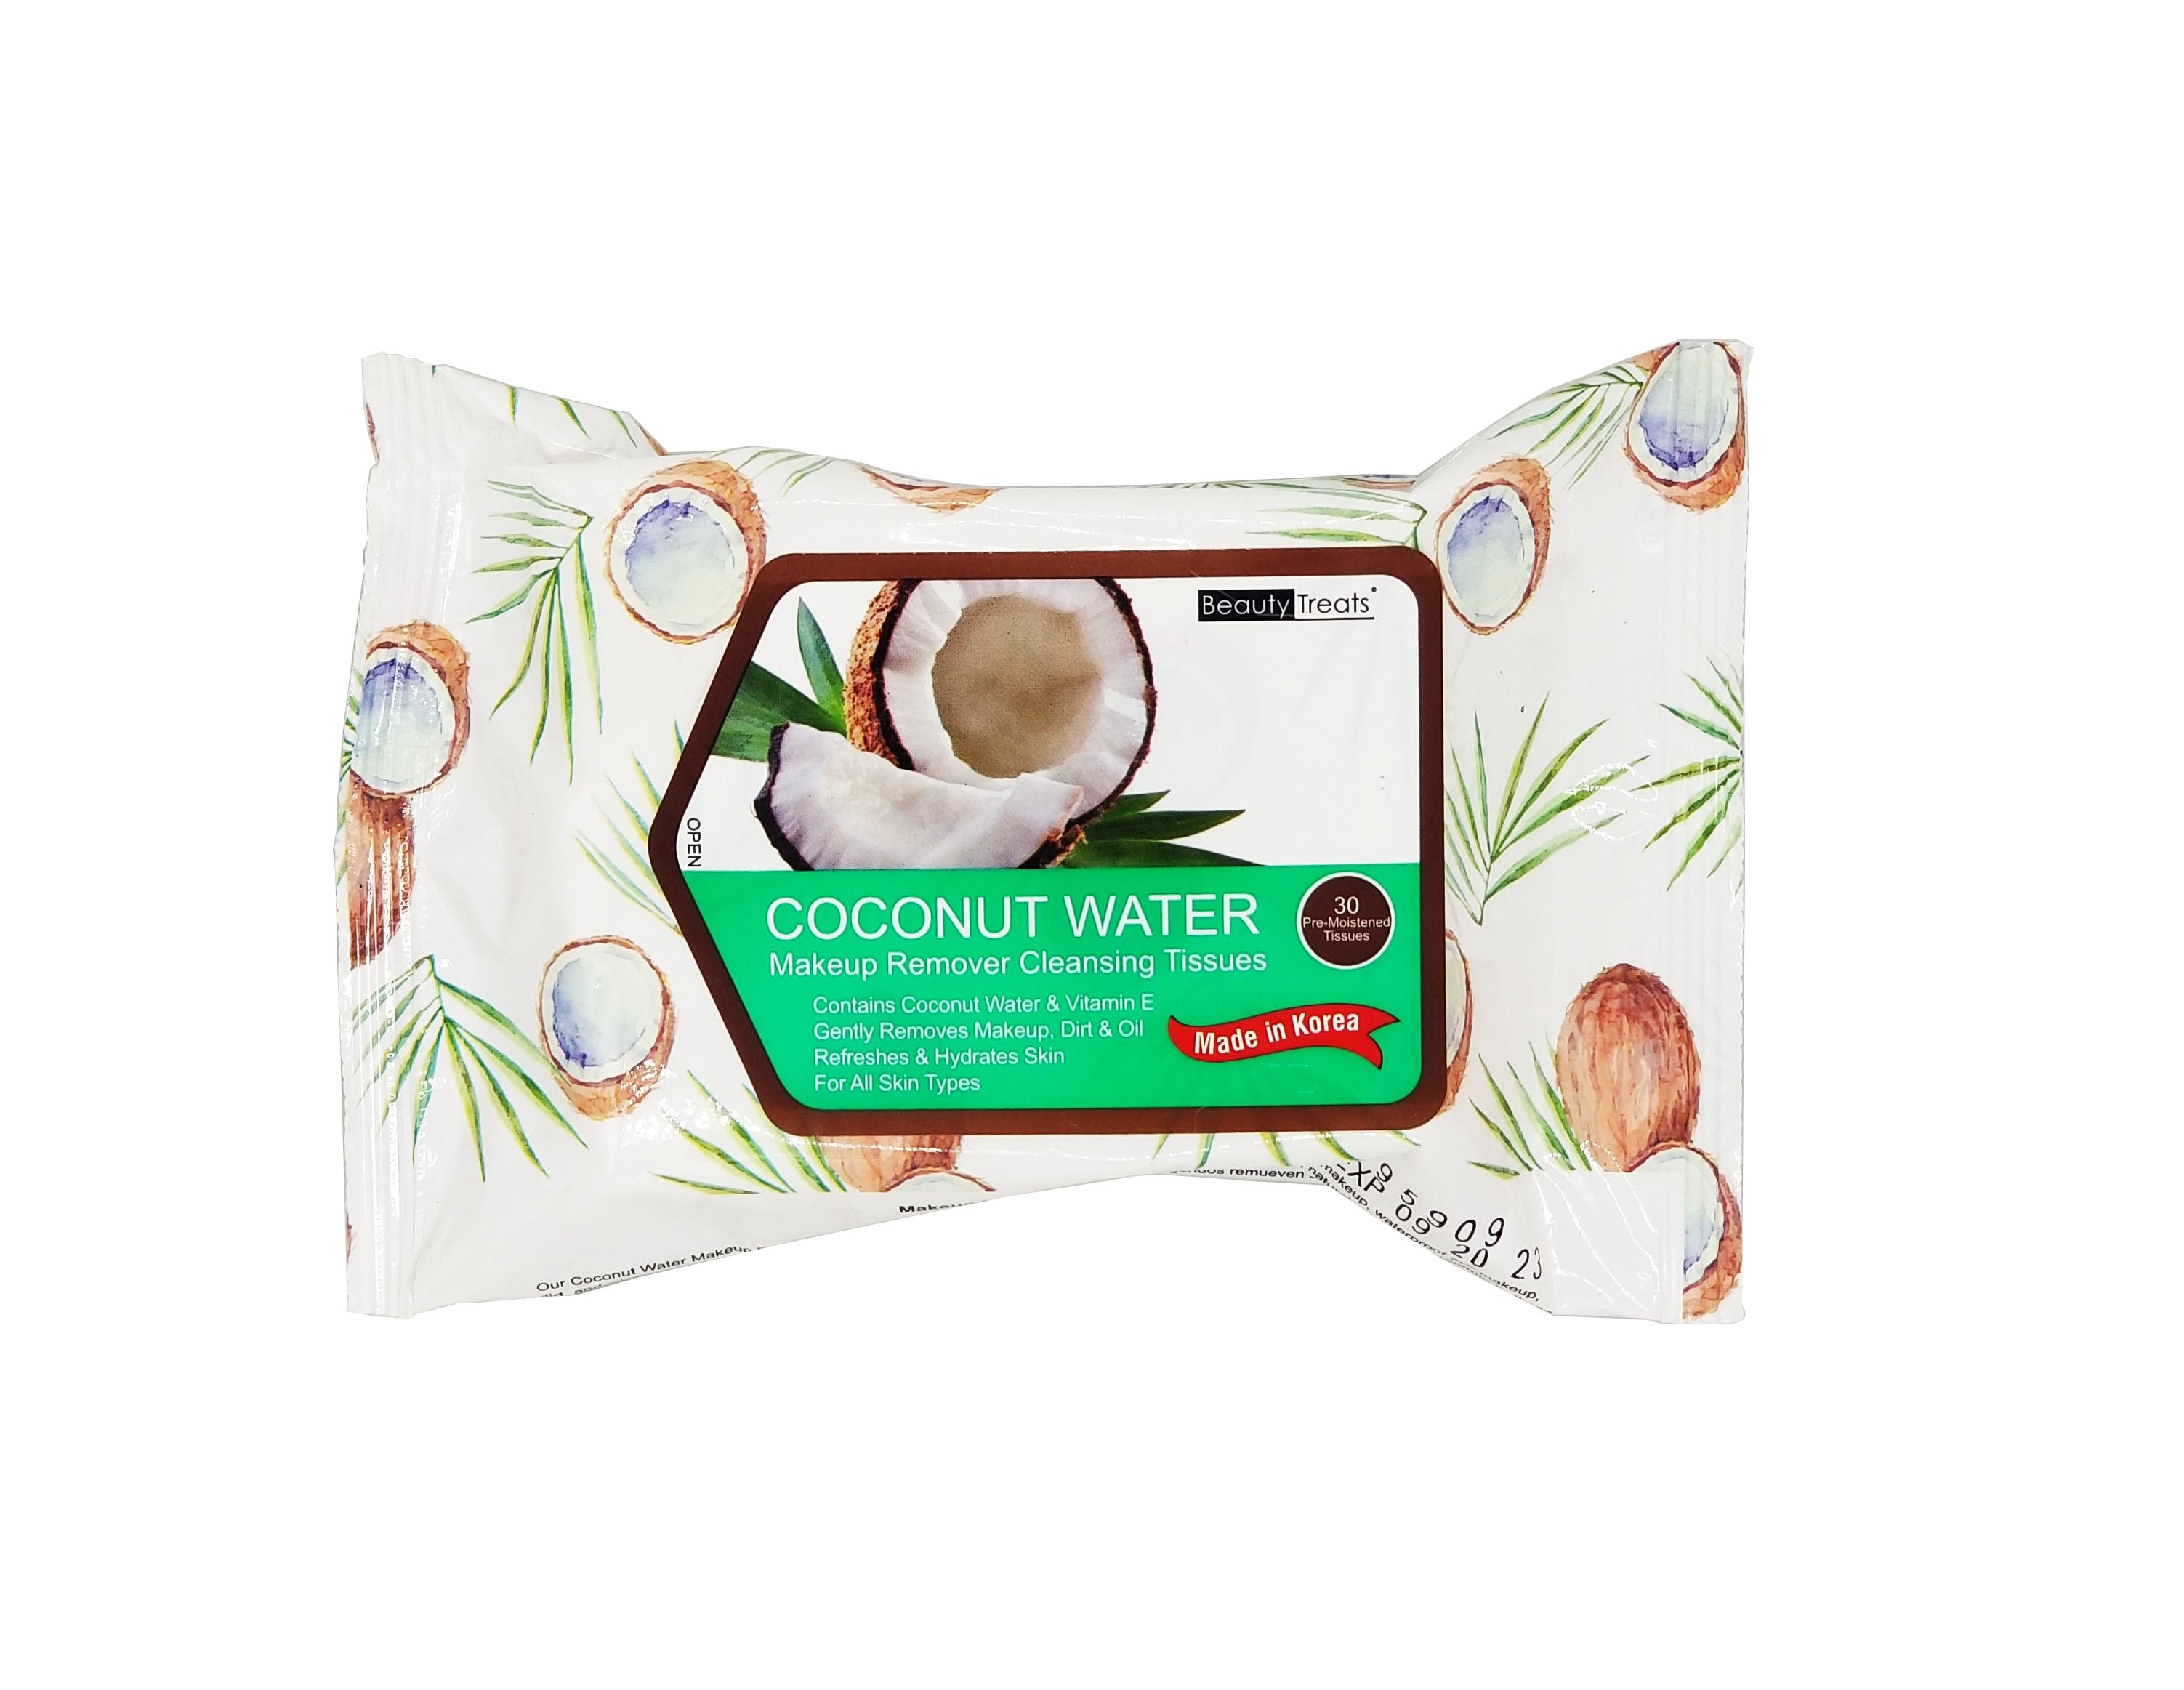 Coconut Water Makeup Remover Cleansing